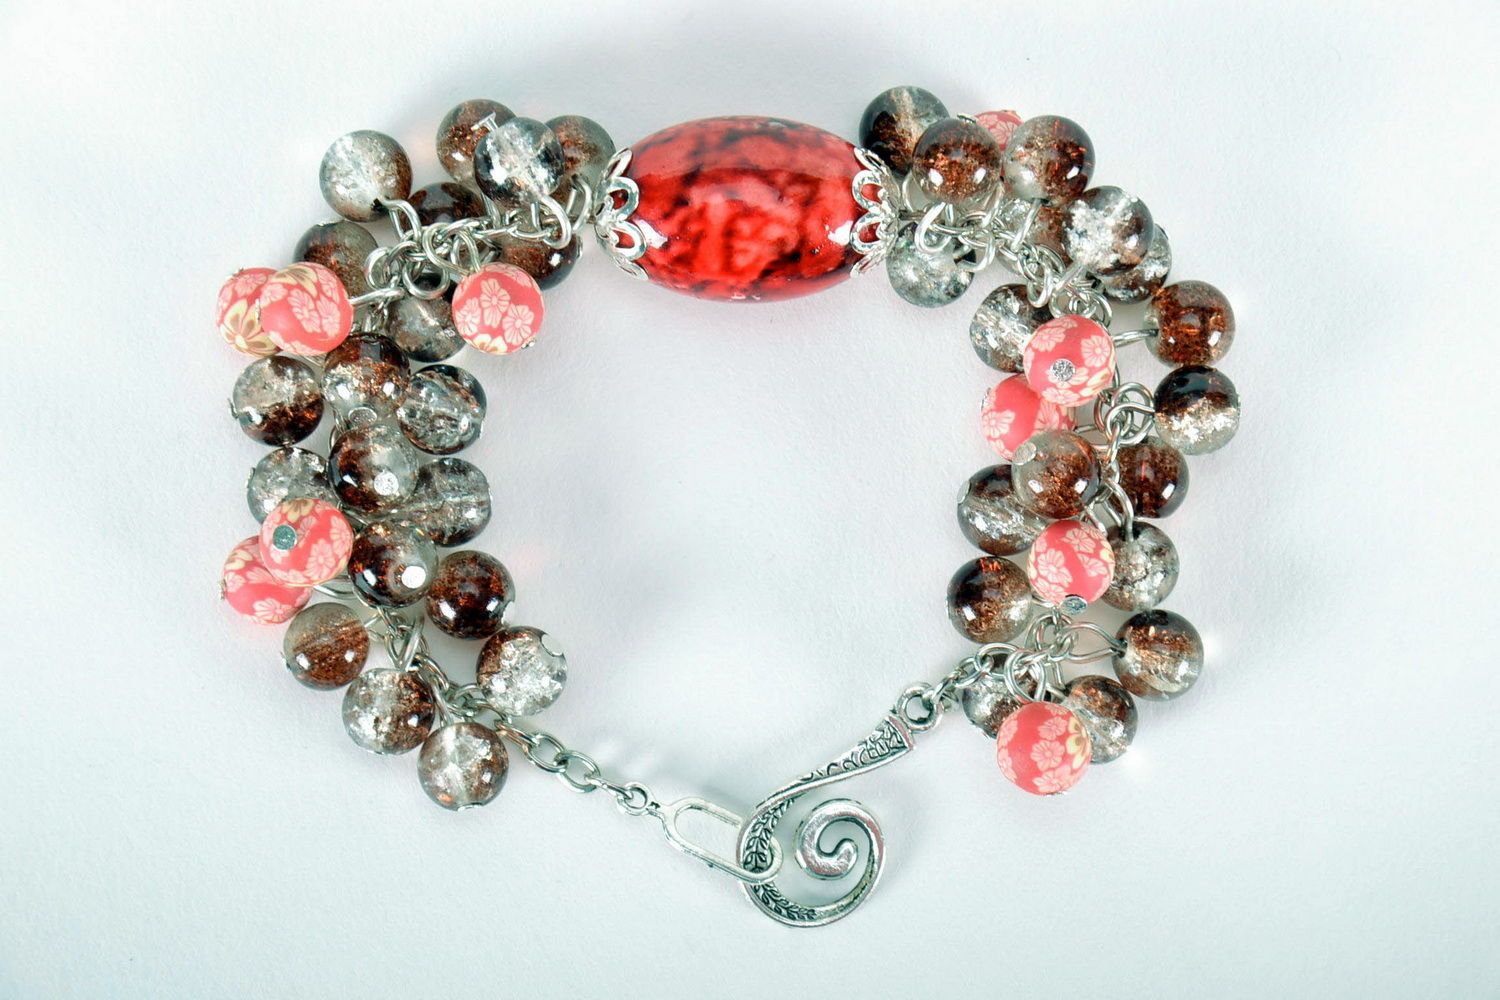 Bracelet made from glass beads and artificial stone photo 2